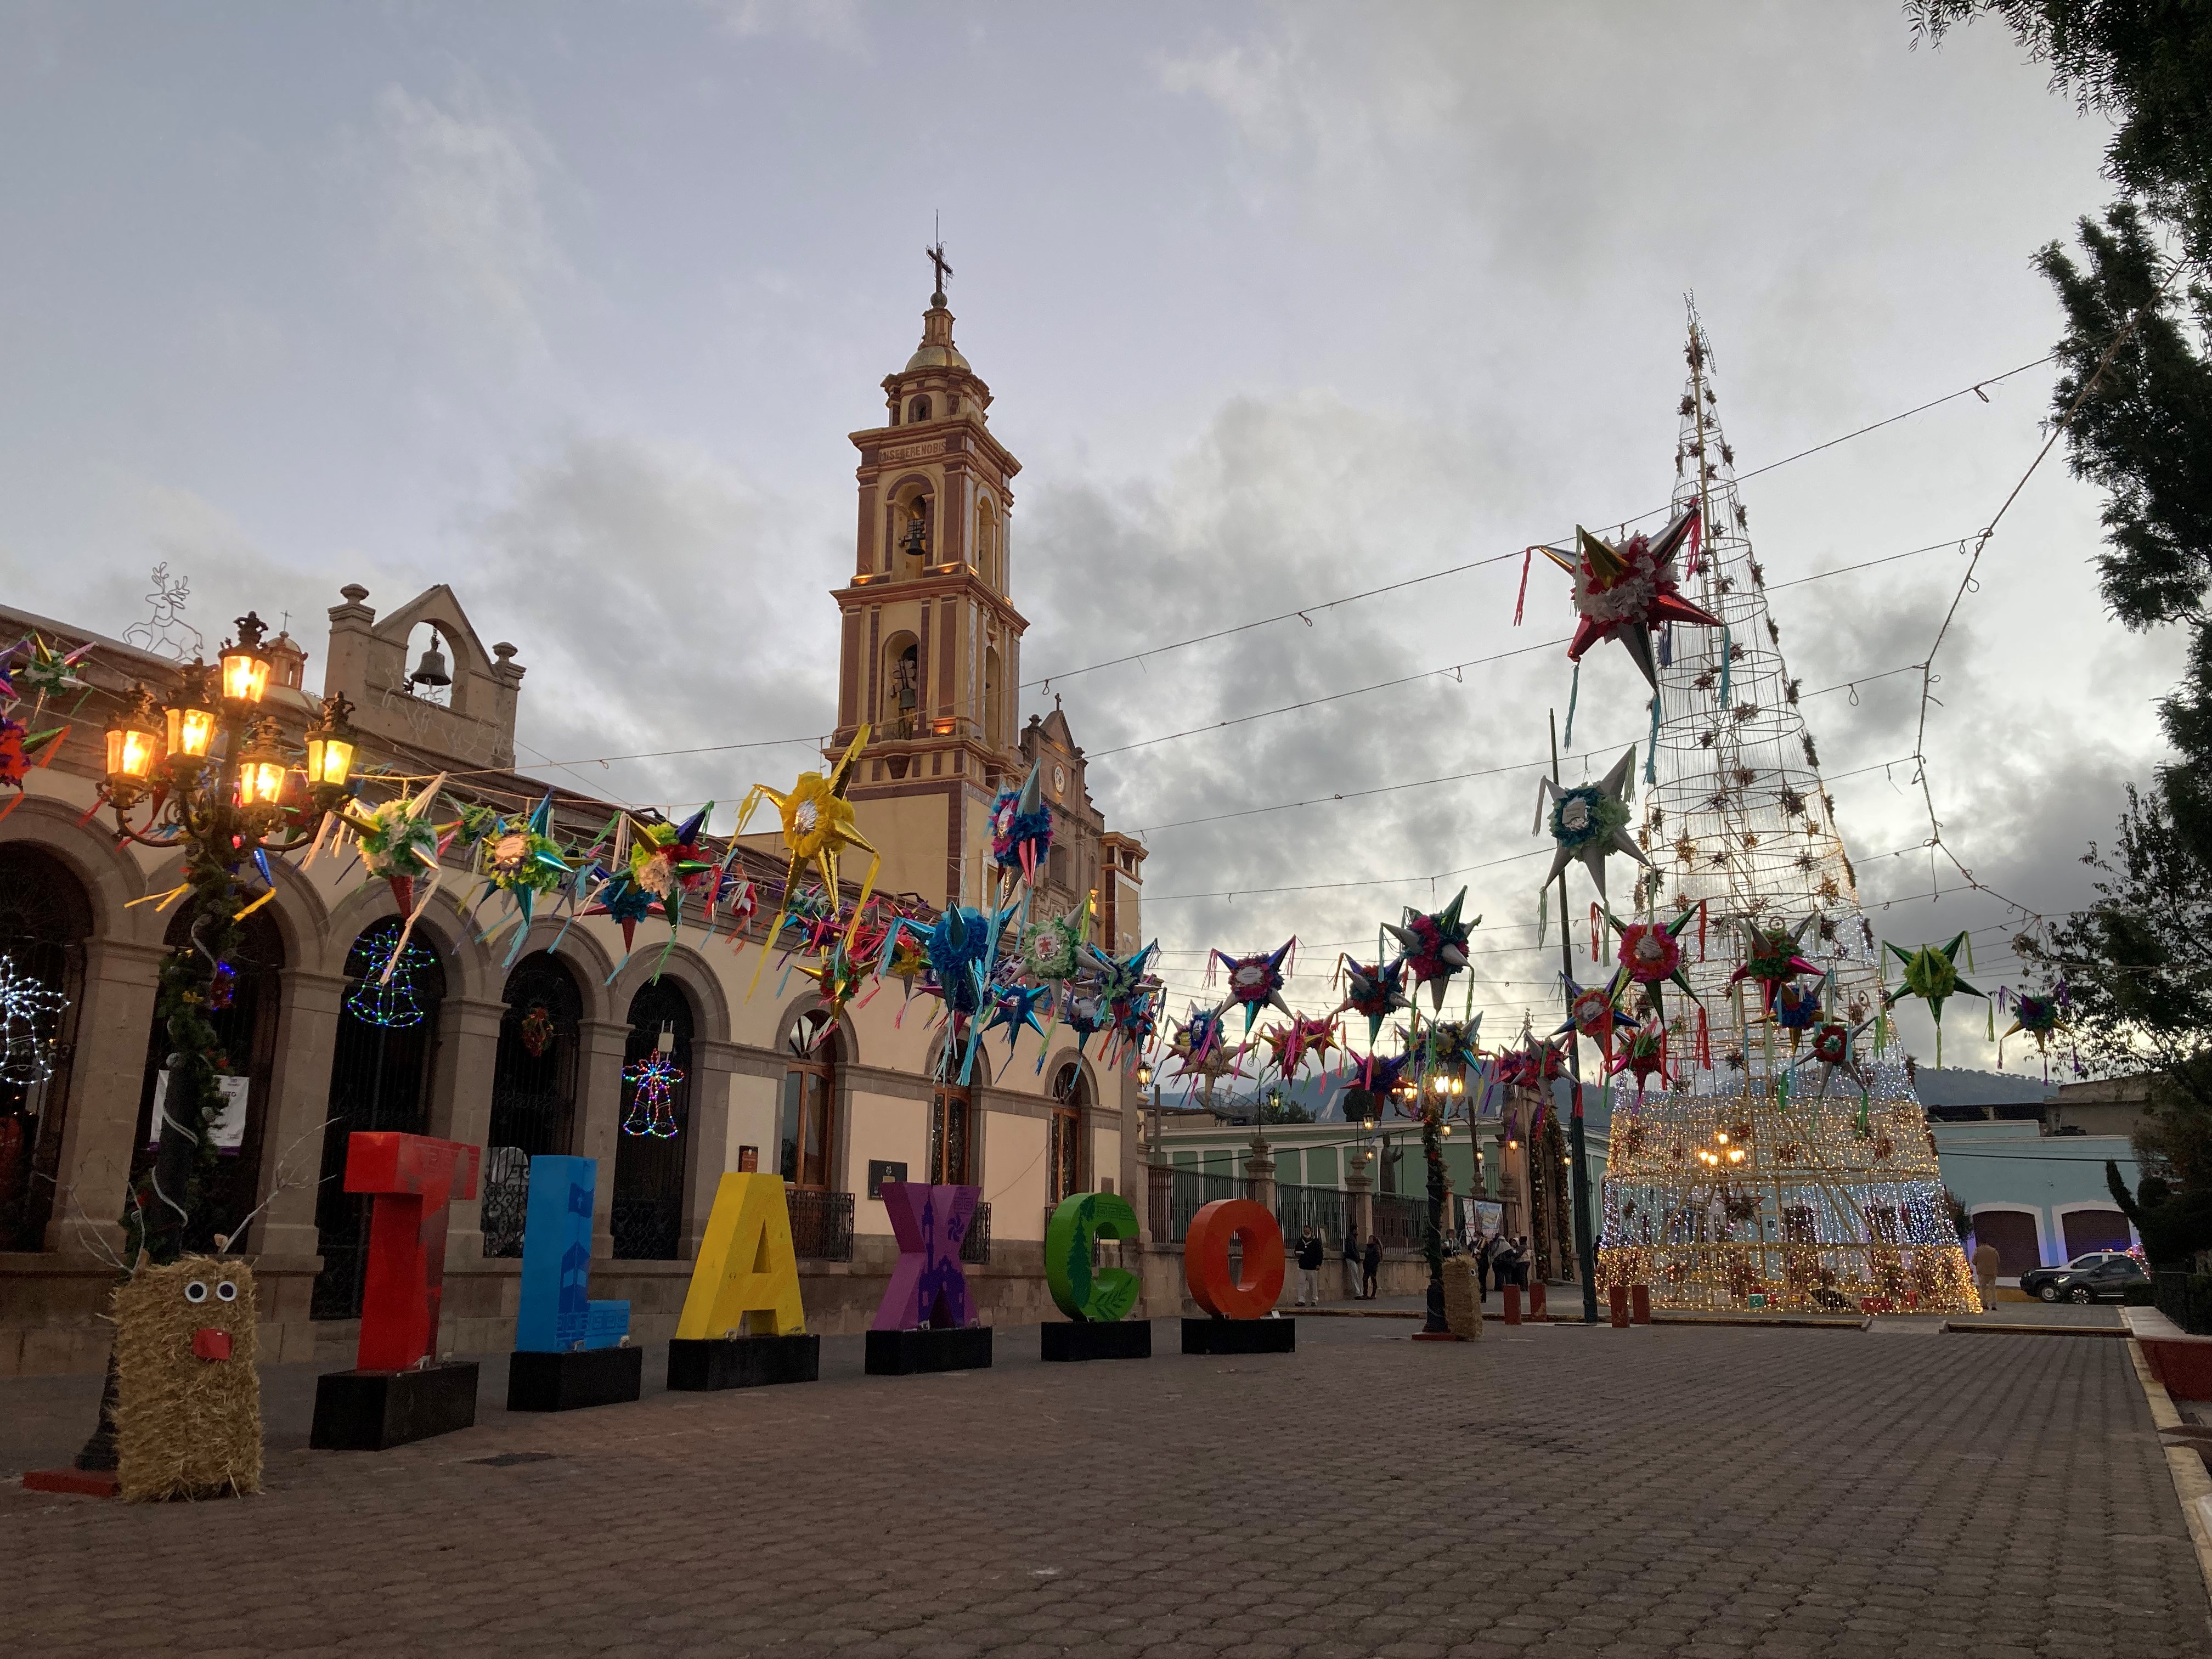 The downtown Centro park in Tlaxco, Tlaxcala. Decorated for the Christmas season.